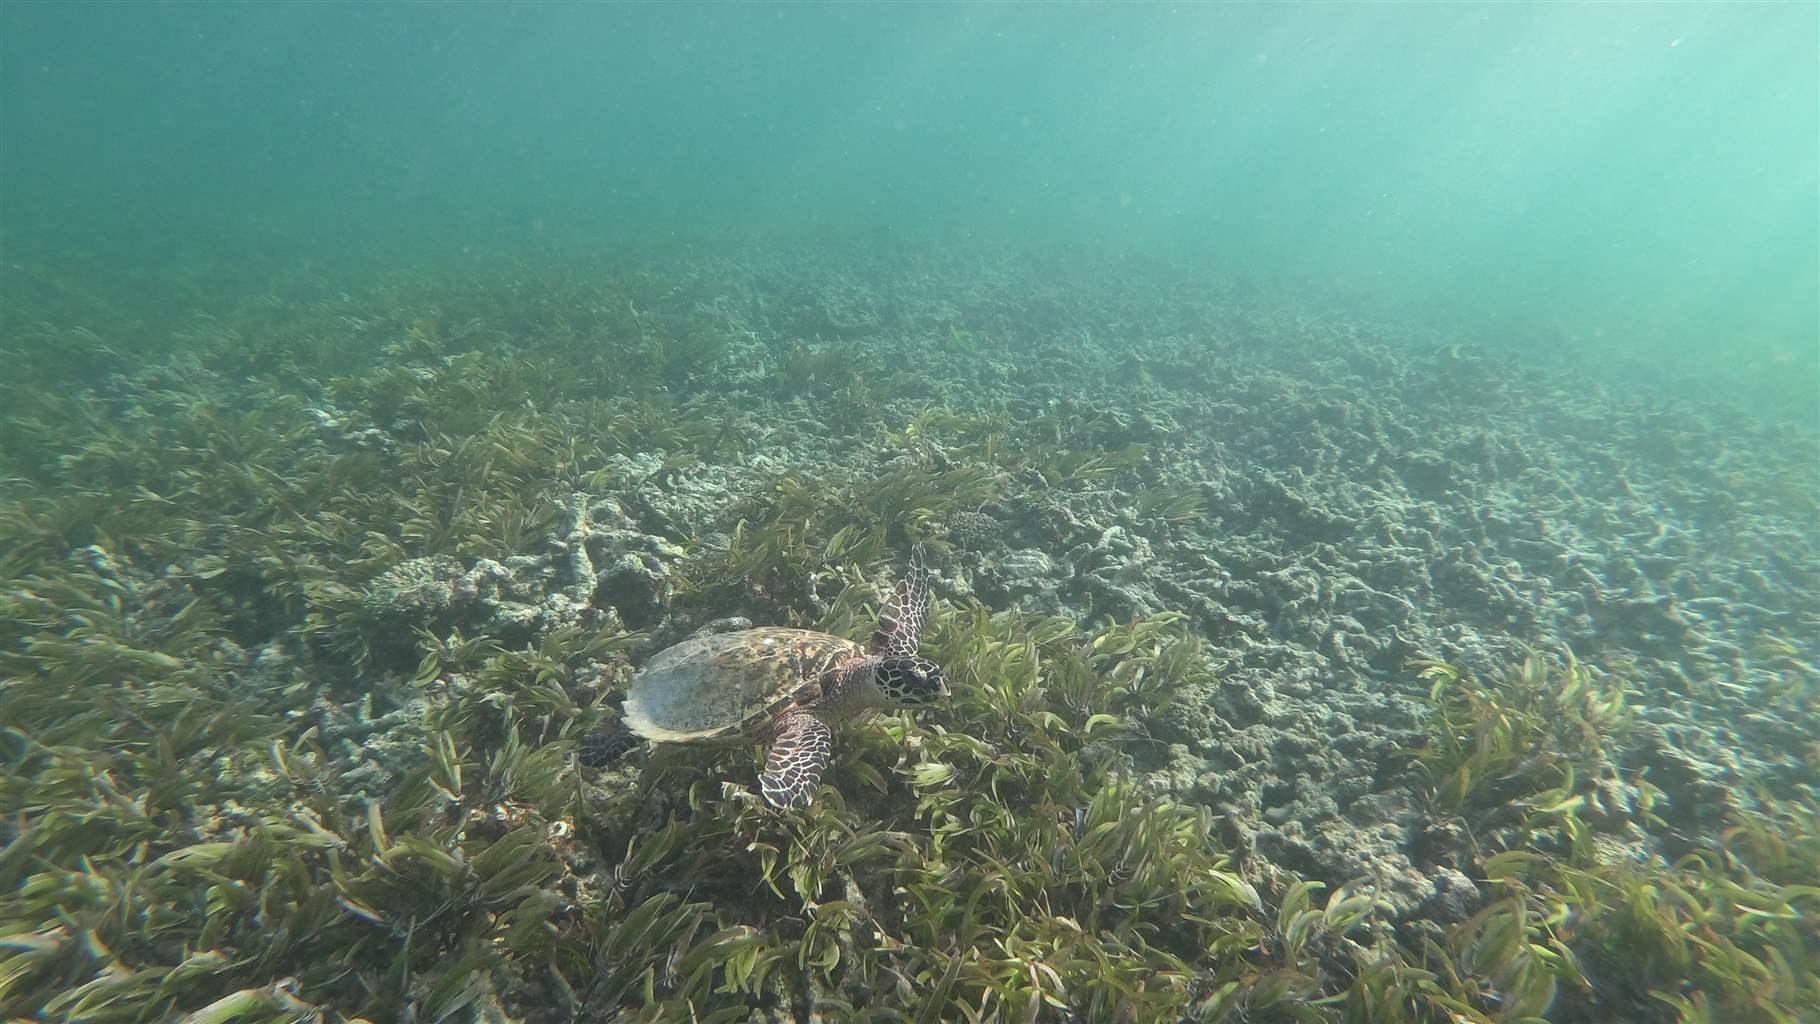 A hawksbill sea turtle swims above a green seagrass meadow and coral rubble off the coast of Seychelles.